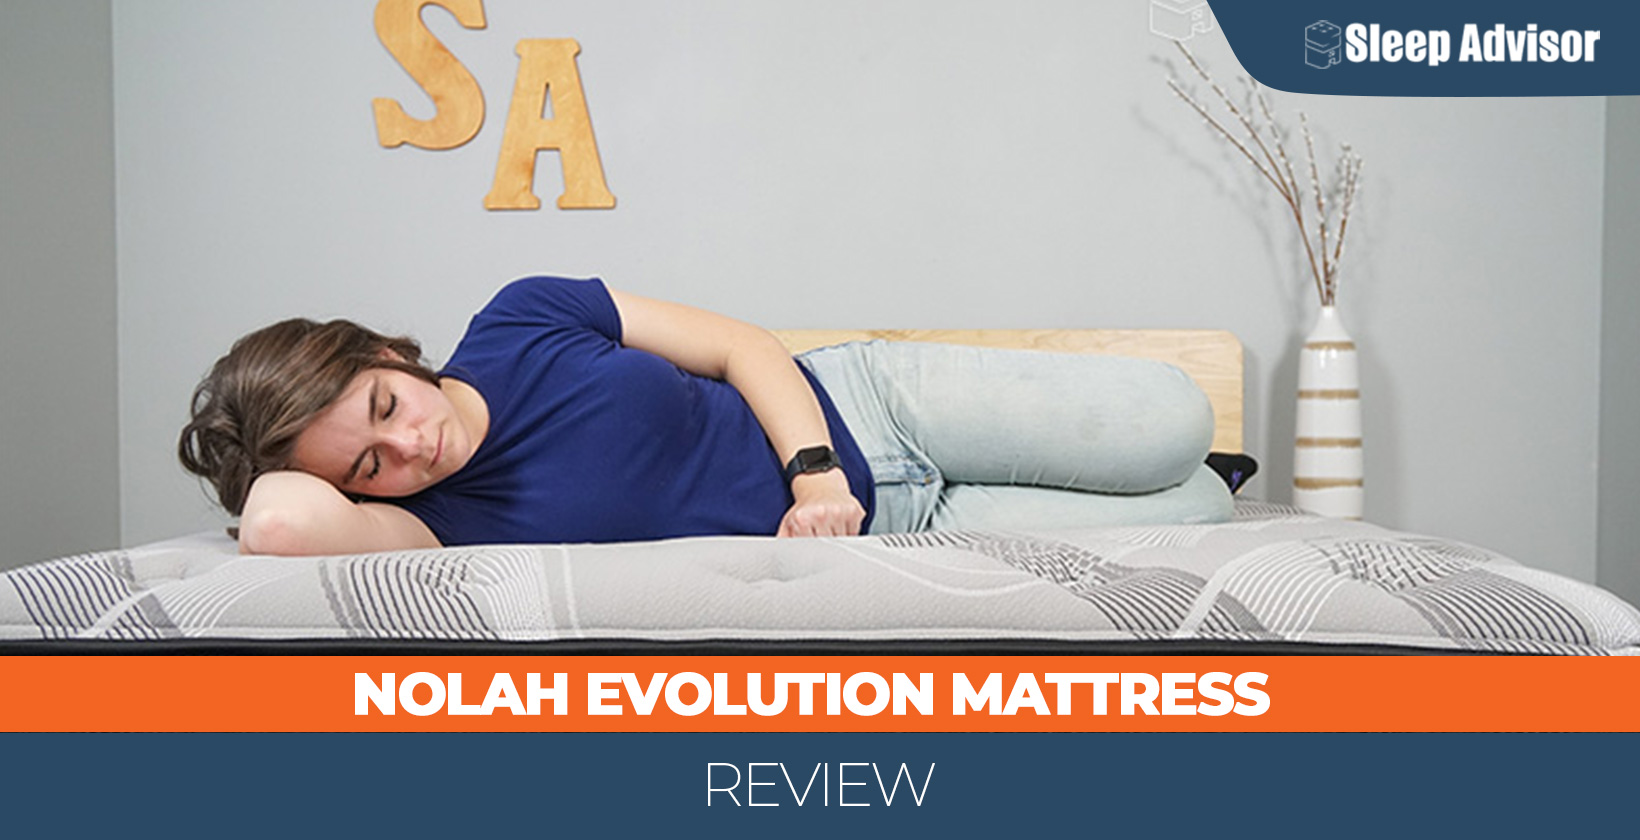 Nolah Evolution Mattress Review and Prices